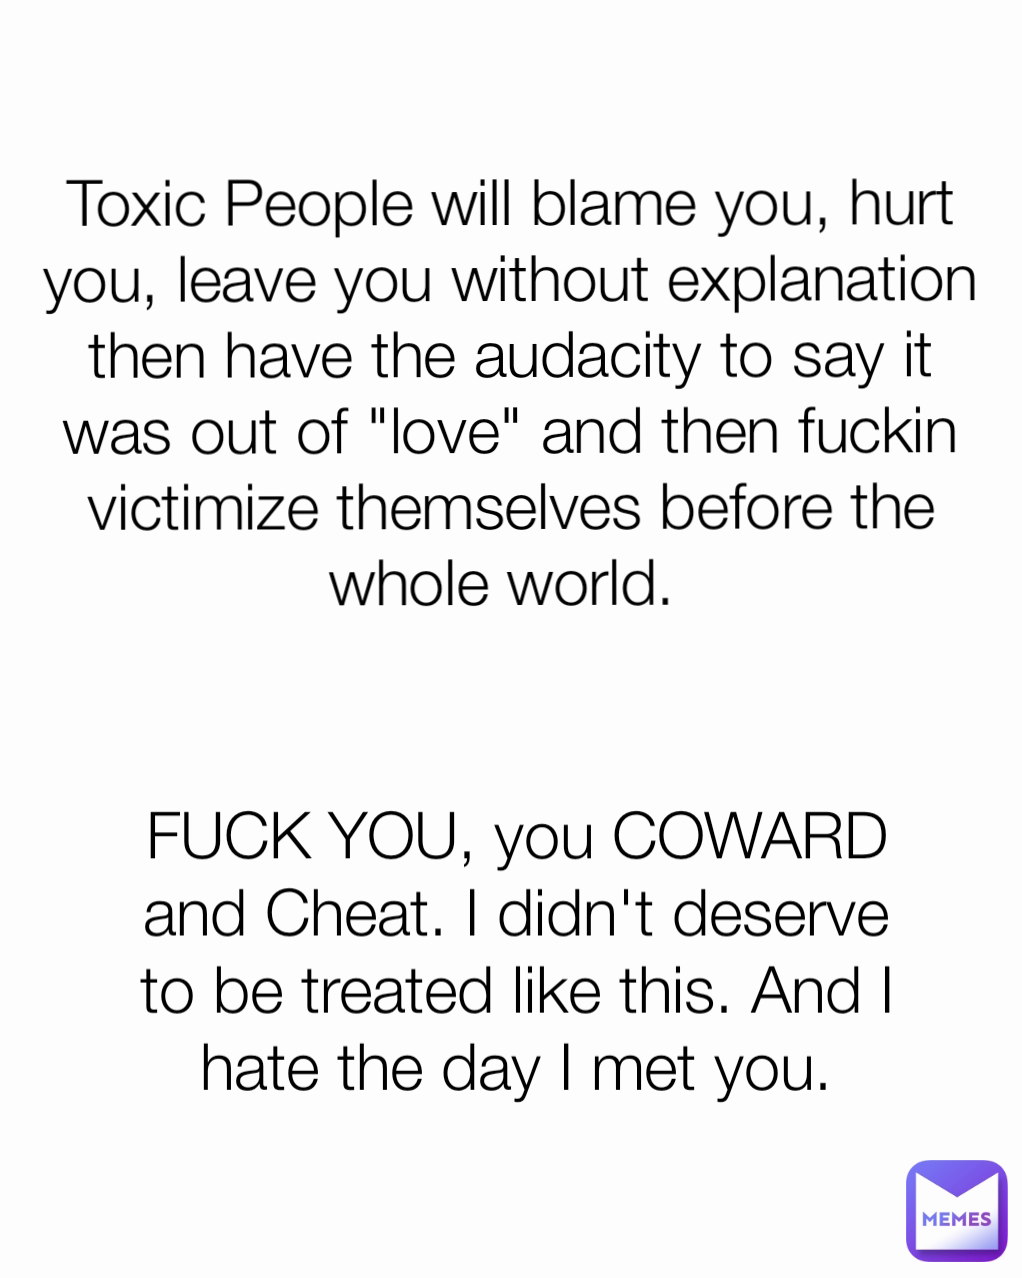 Toxic People will blame you, hurt you, leave you without explanation then have the audacity to say it was out of "love" and then fuckin victimize themselves before the whole world.  FUCK YOU, you COWARD and Cheat. I didn't deserve to be treated like this. And I hate the day I met you.